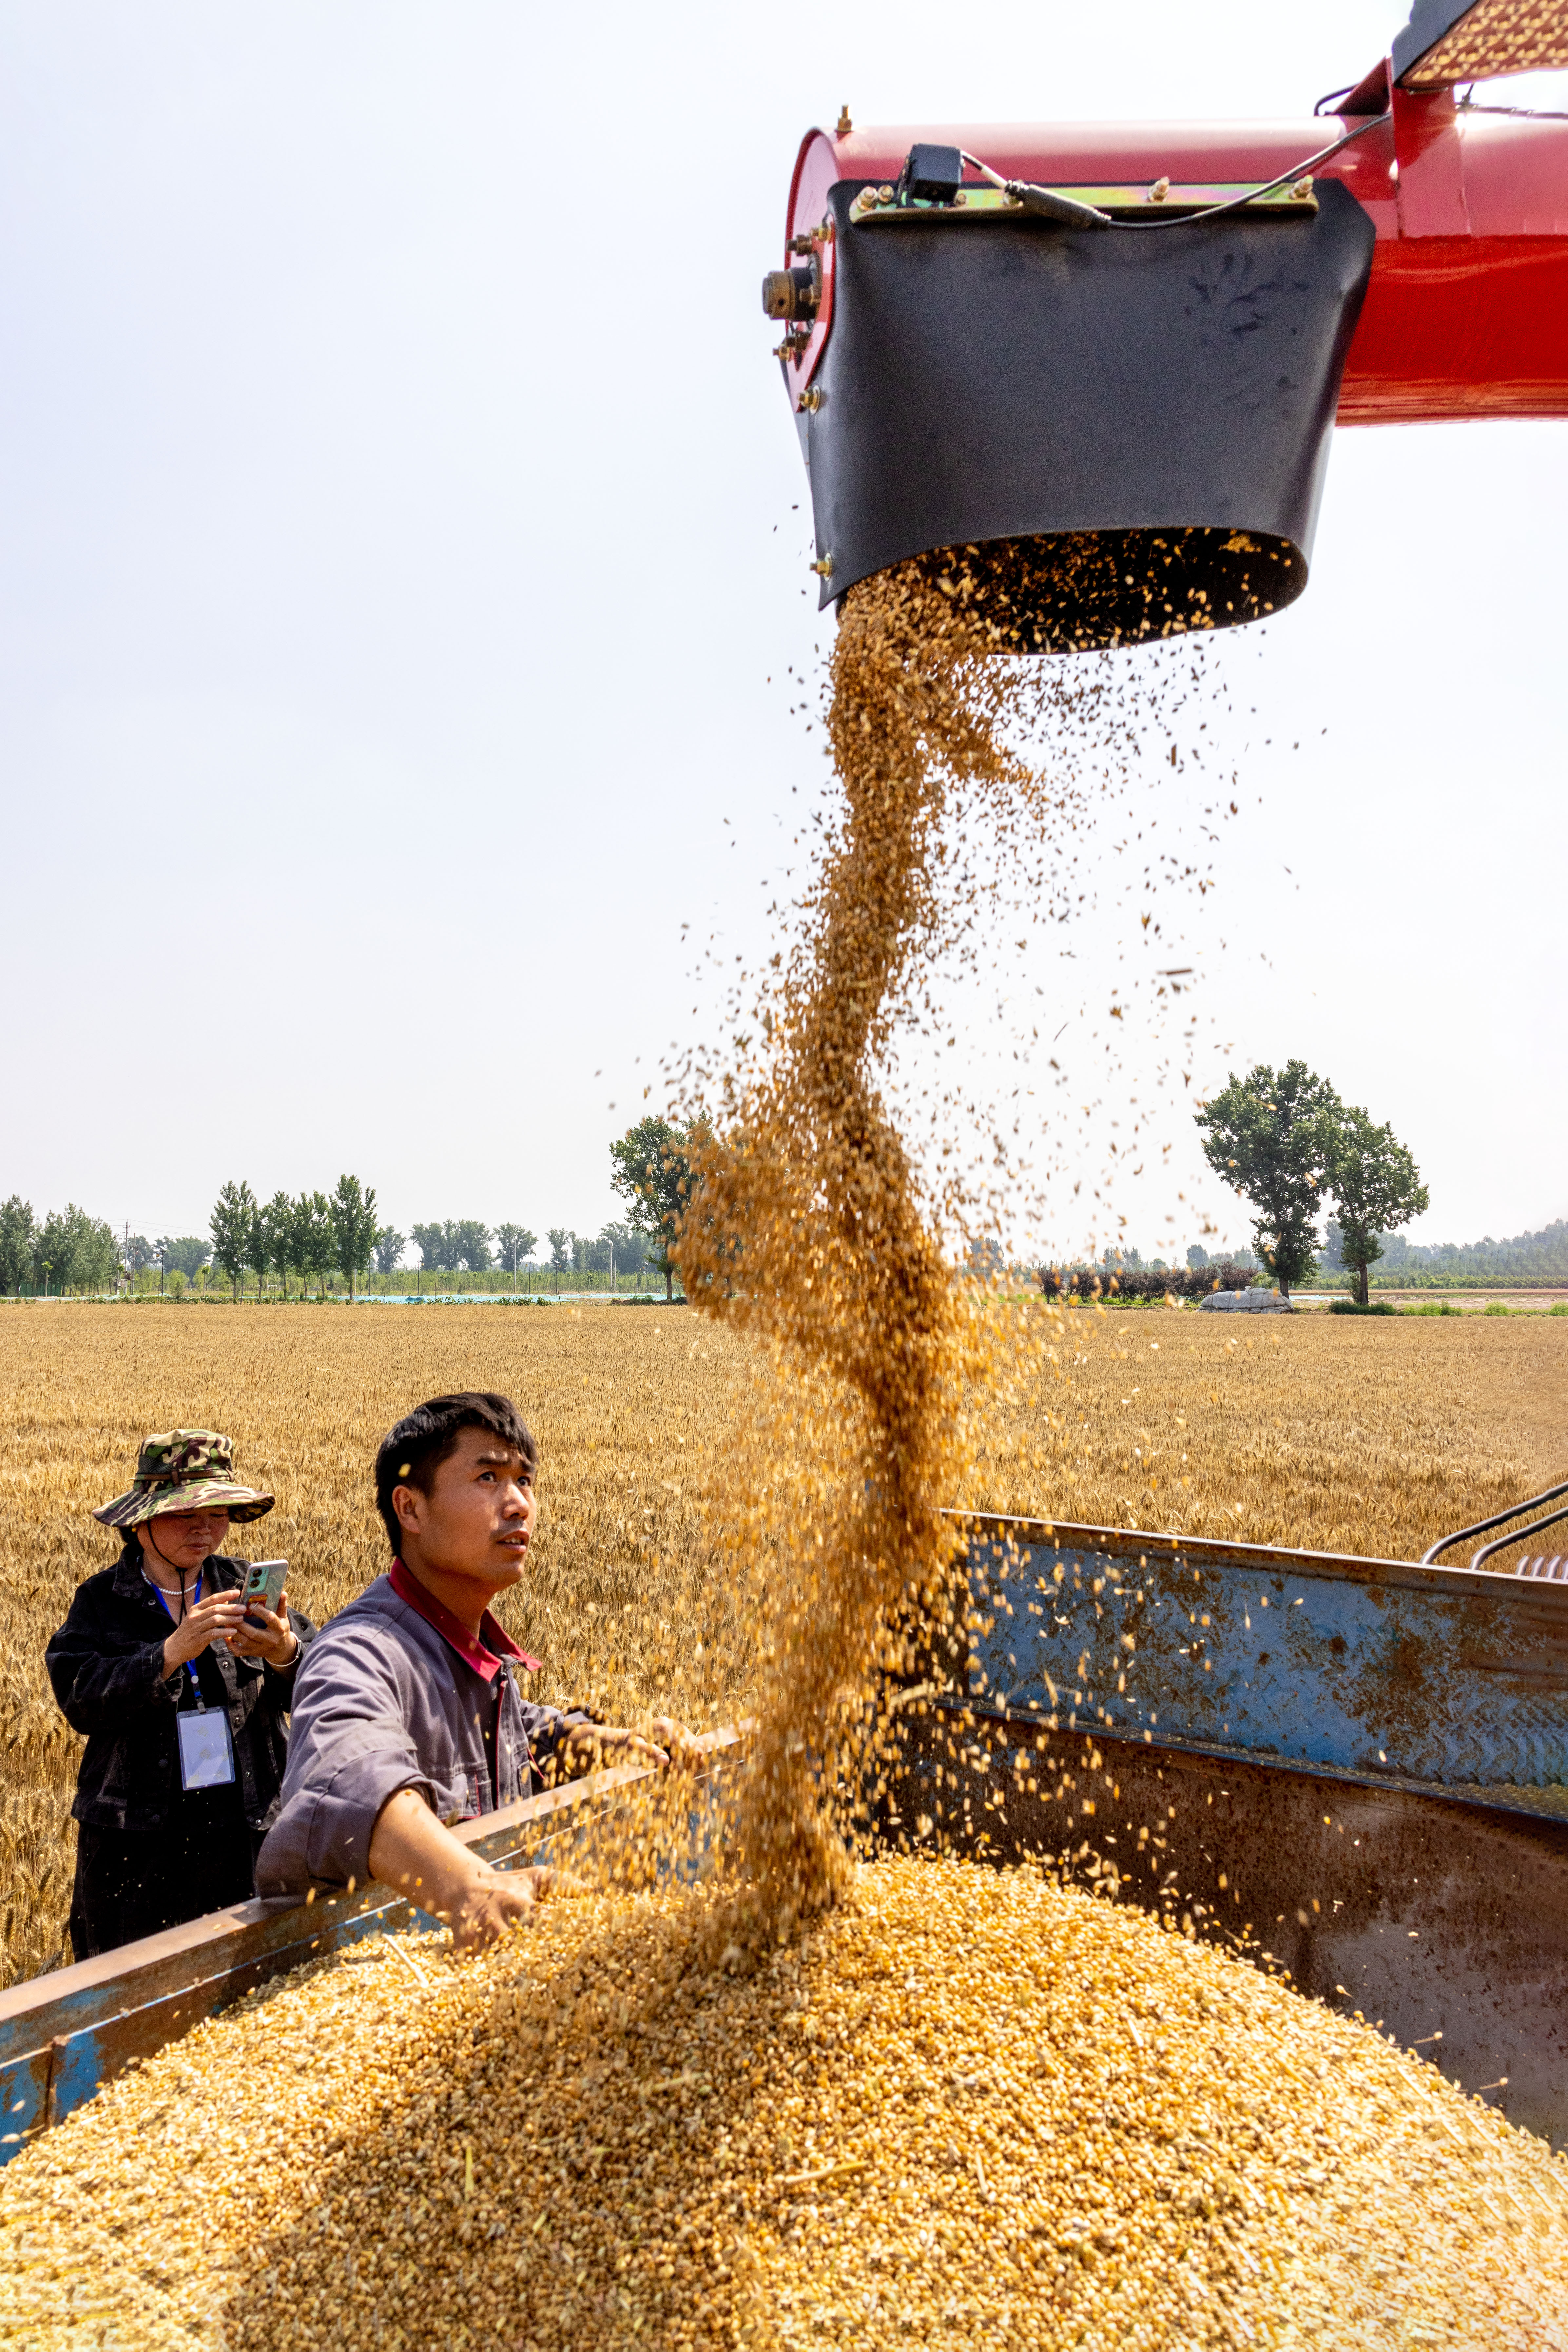 Villagers sort the grain harvested in Huaxian County of Anyang, central China's Henan Province on May 31, 2023. /CNSPHOTO